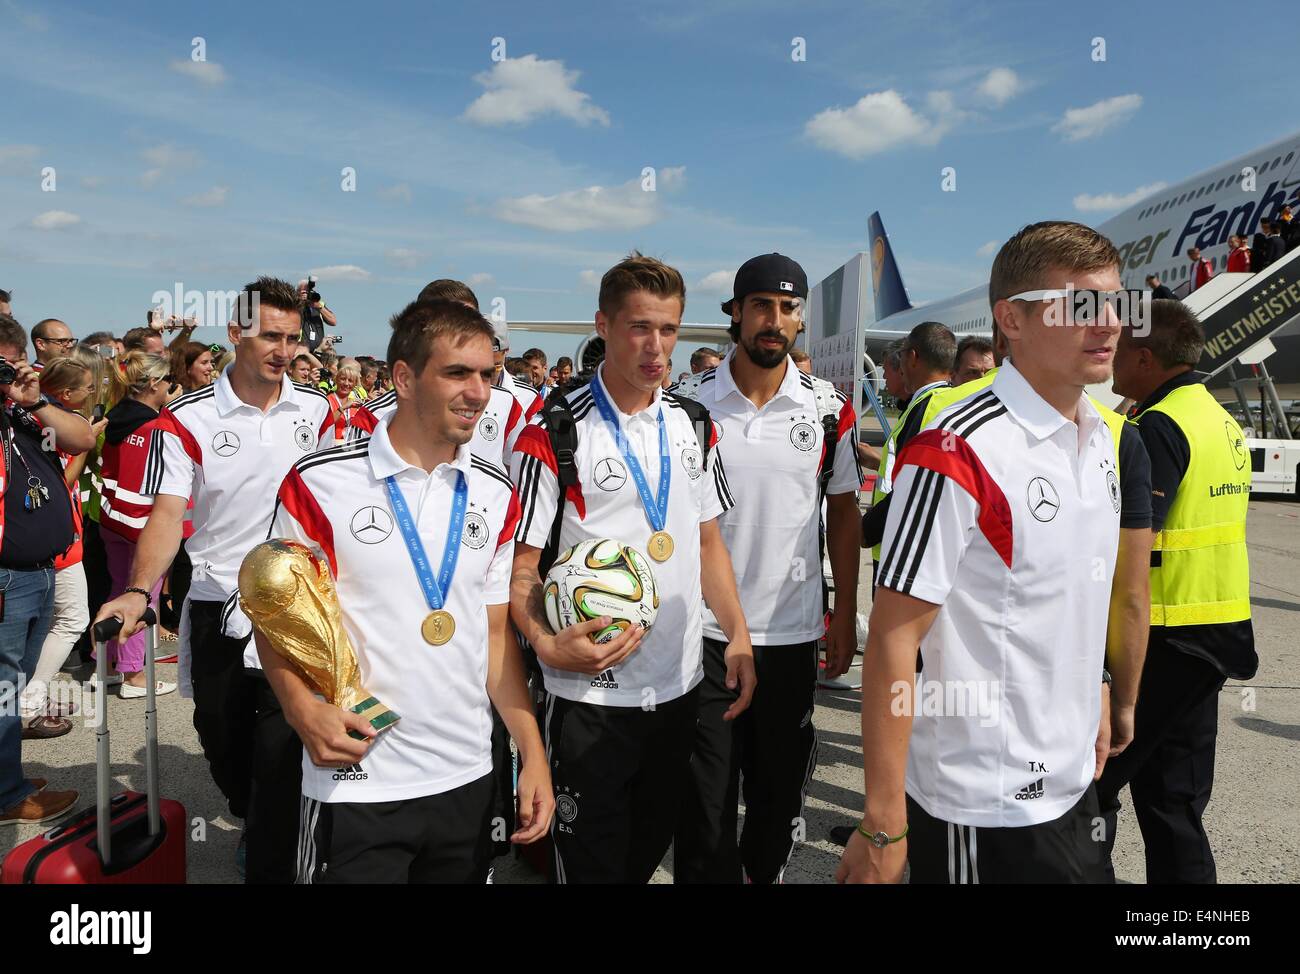 Berlin, Germany. 15th July, 2014. HANDOUT - A handout picture shows German national soccer players Miroslav Klose (L-R), Philipp Lahm, Lars Bender, Sami Khedira and Toni Kroos with the World Cup trophy ans a soccer ball in Berlin, Germany, 15 July 2014. Credit:  dpa picture alliance/Alamy Live News Stock Photo